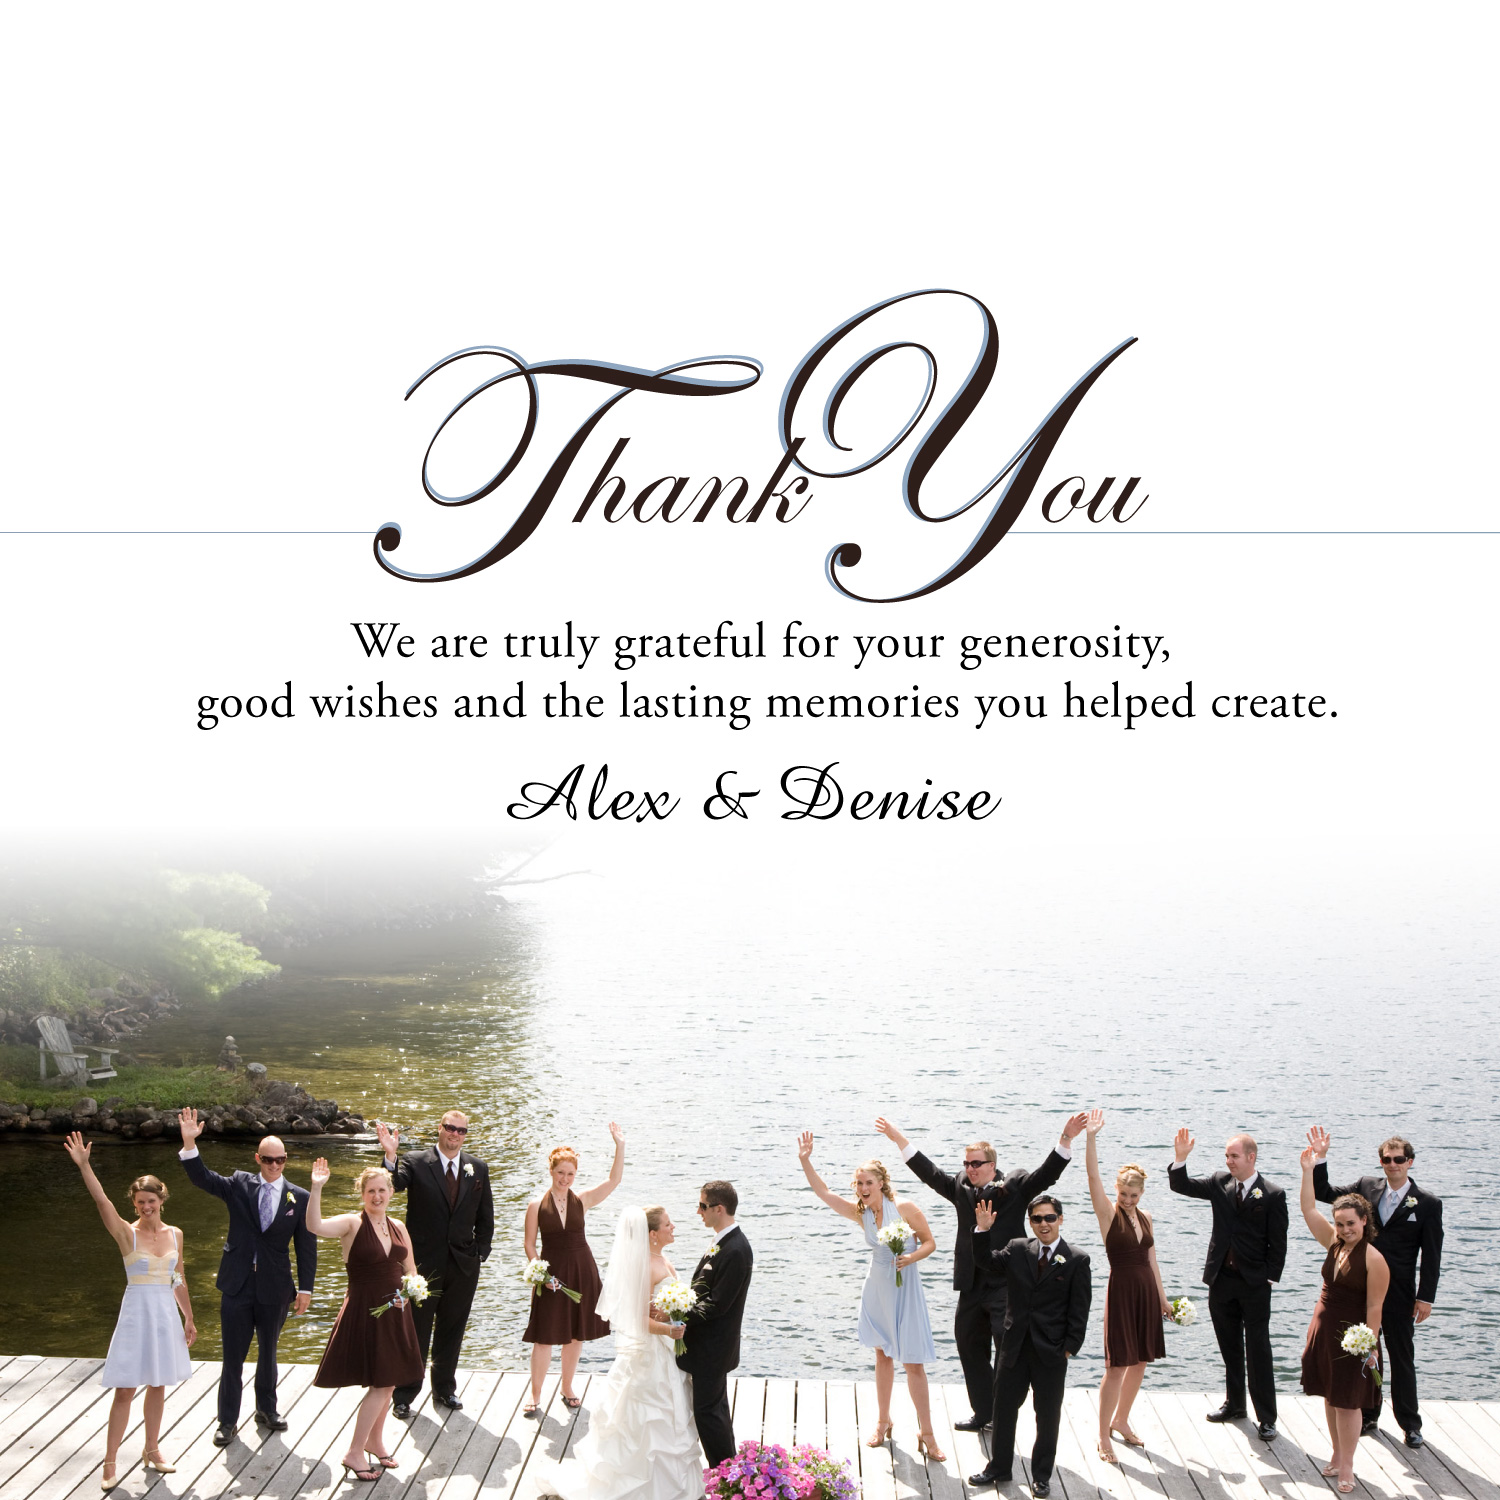 Marketing Wonders: "Thank You for coming to our wedding"